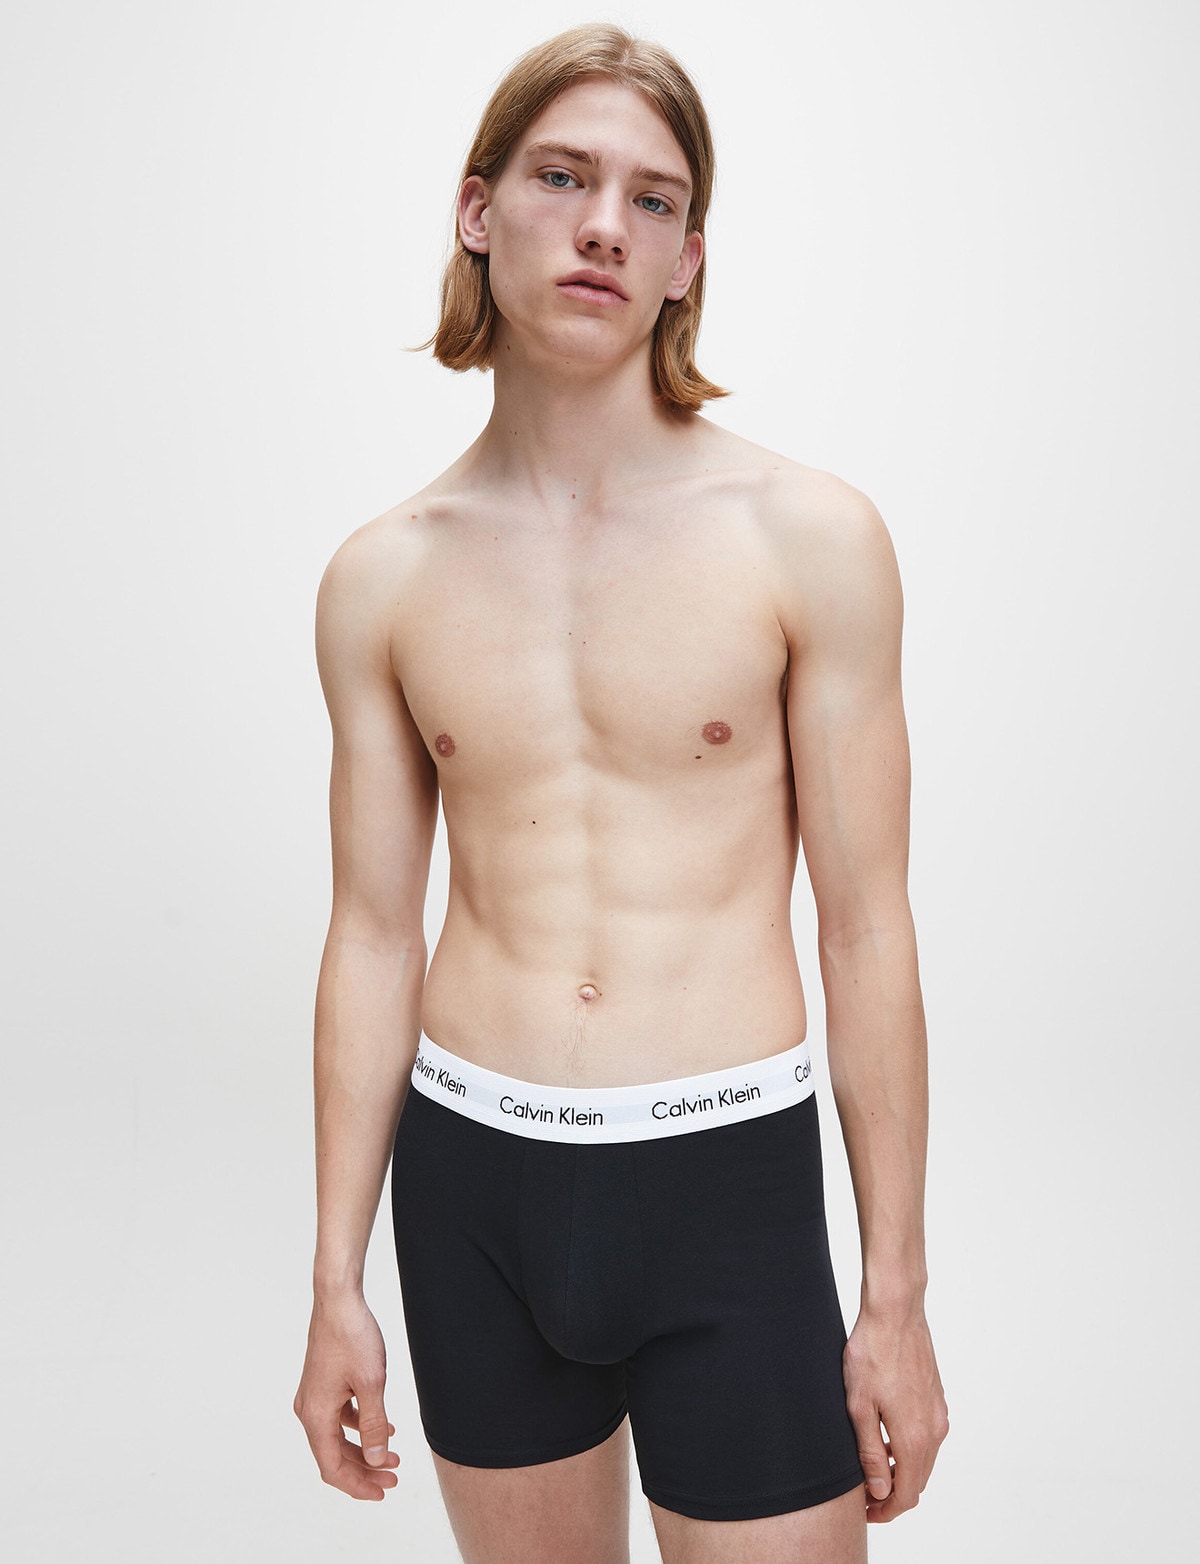 Calvin Klein - Softness to hold on to. This is the Cotton Stretch